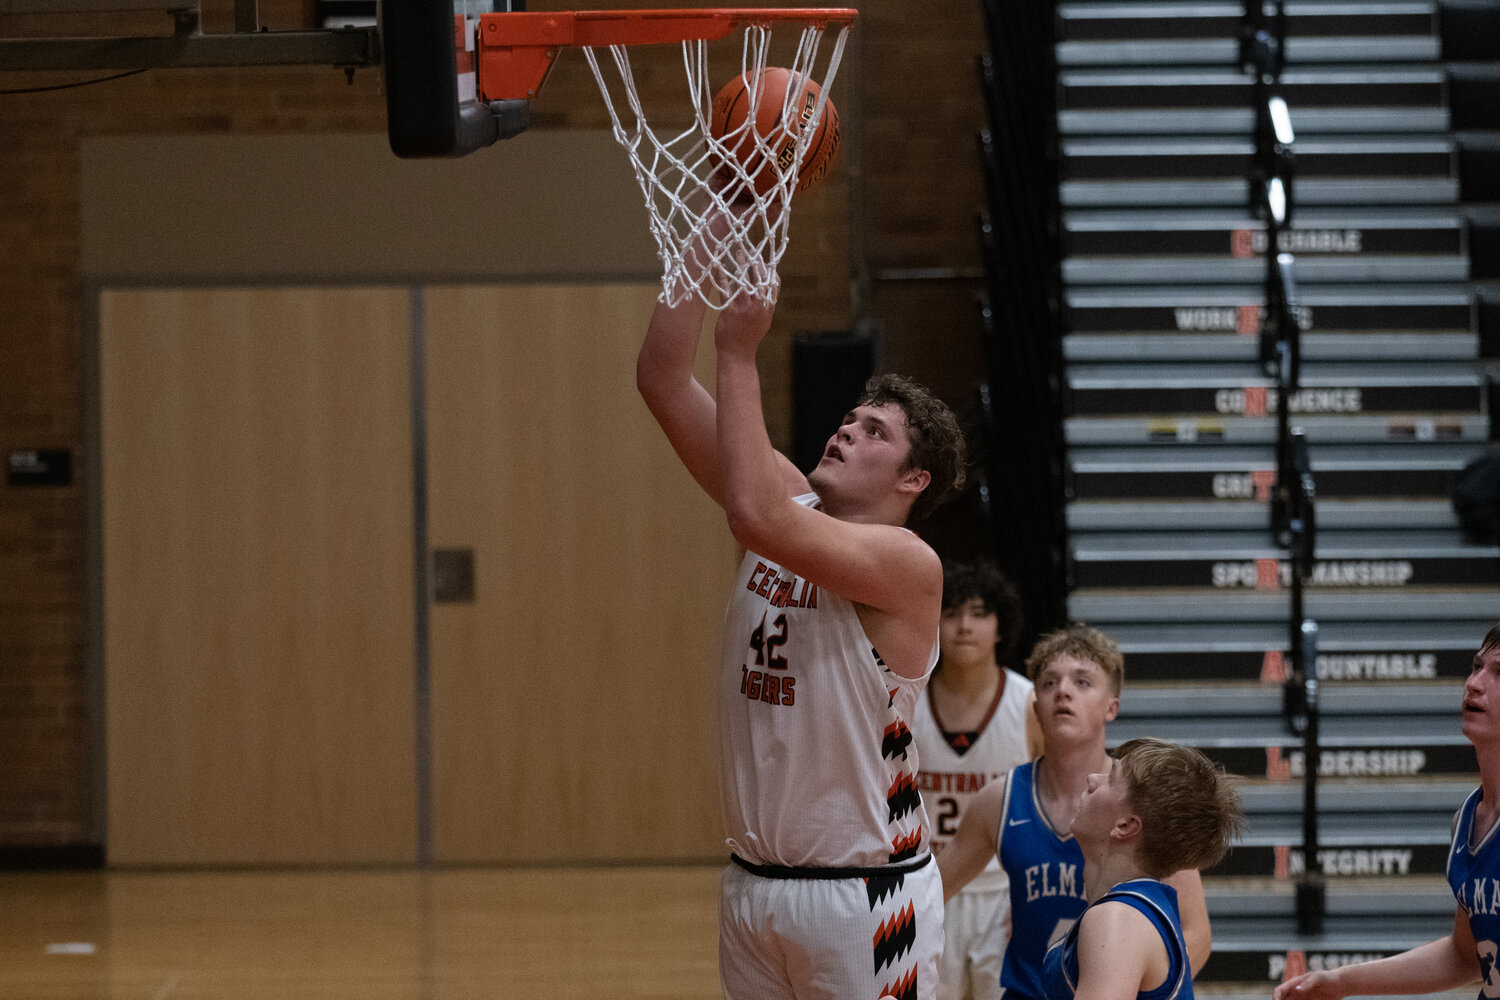 David Daarud puts up a shot in the post during the first half of Centralia's 64-60 loss to Elma on Dec. 4.